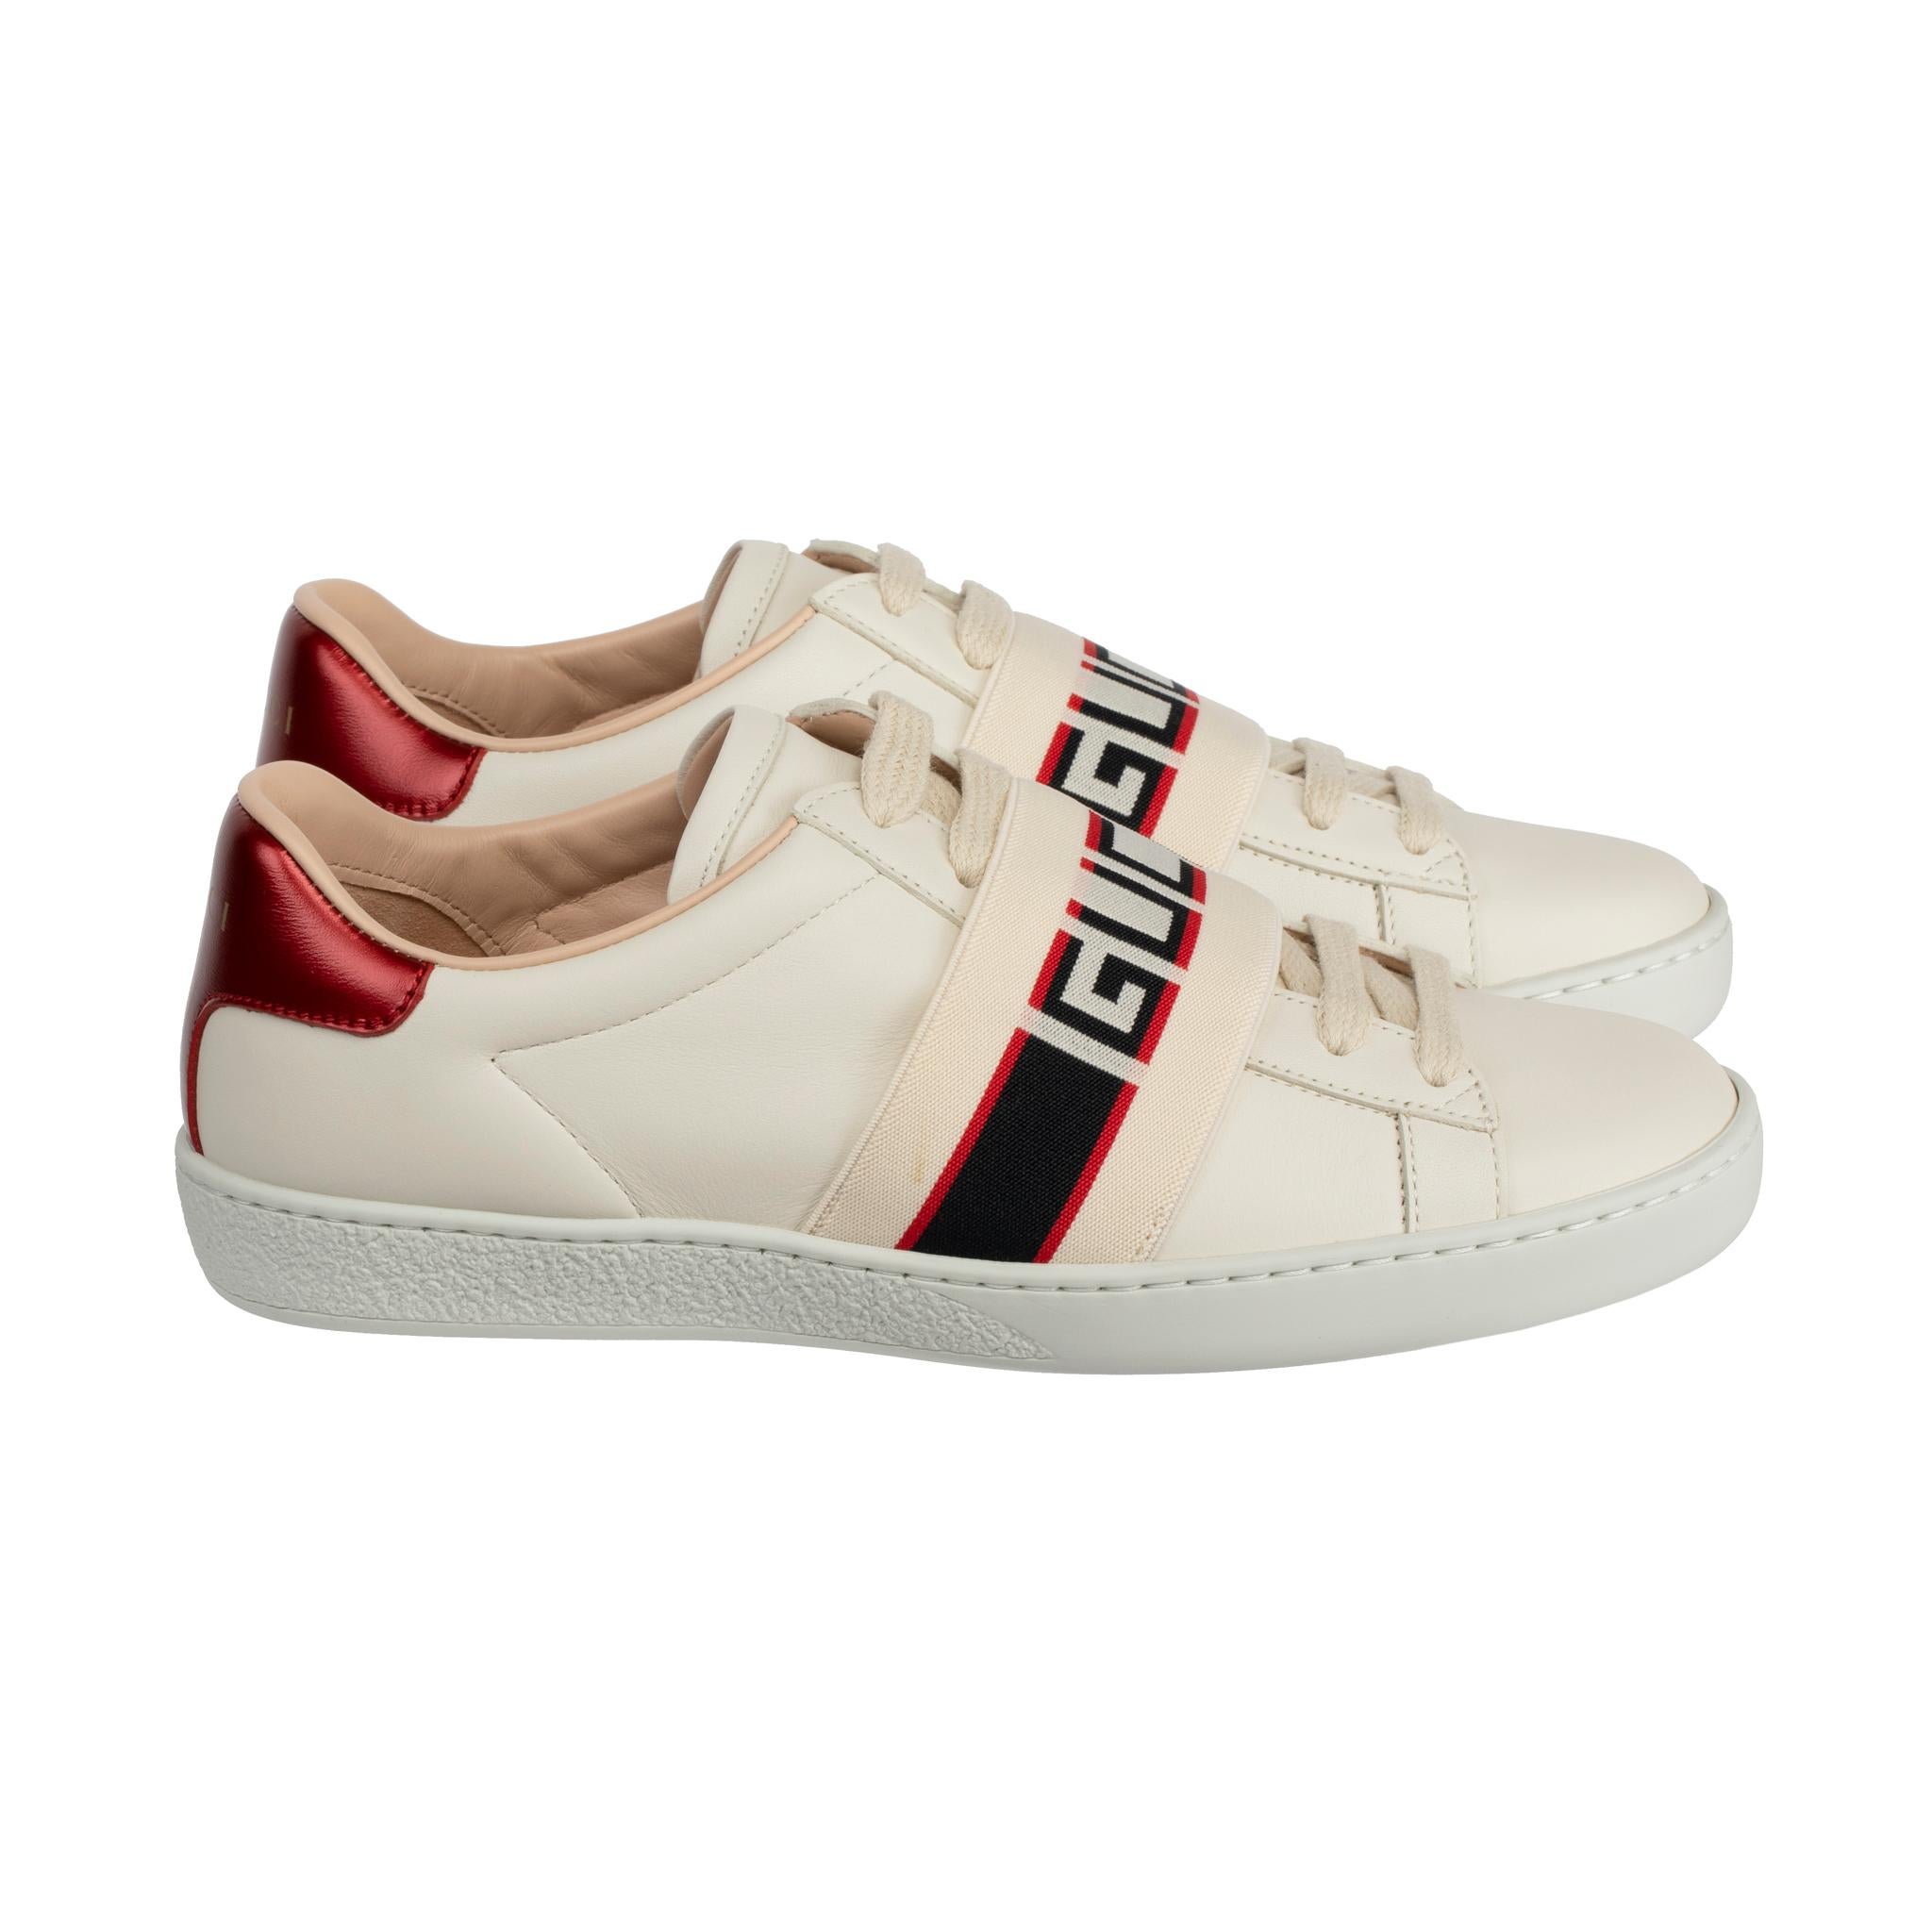 gucci off white shoes